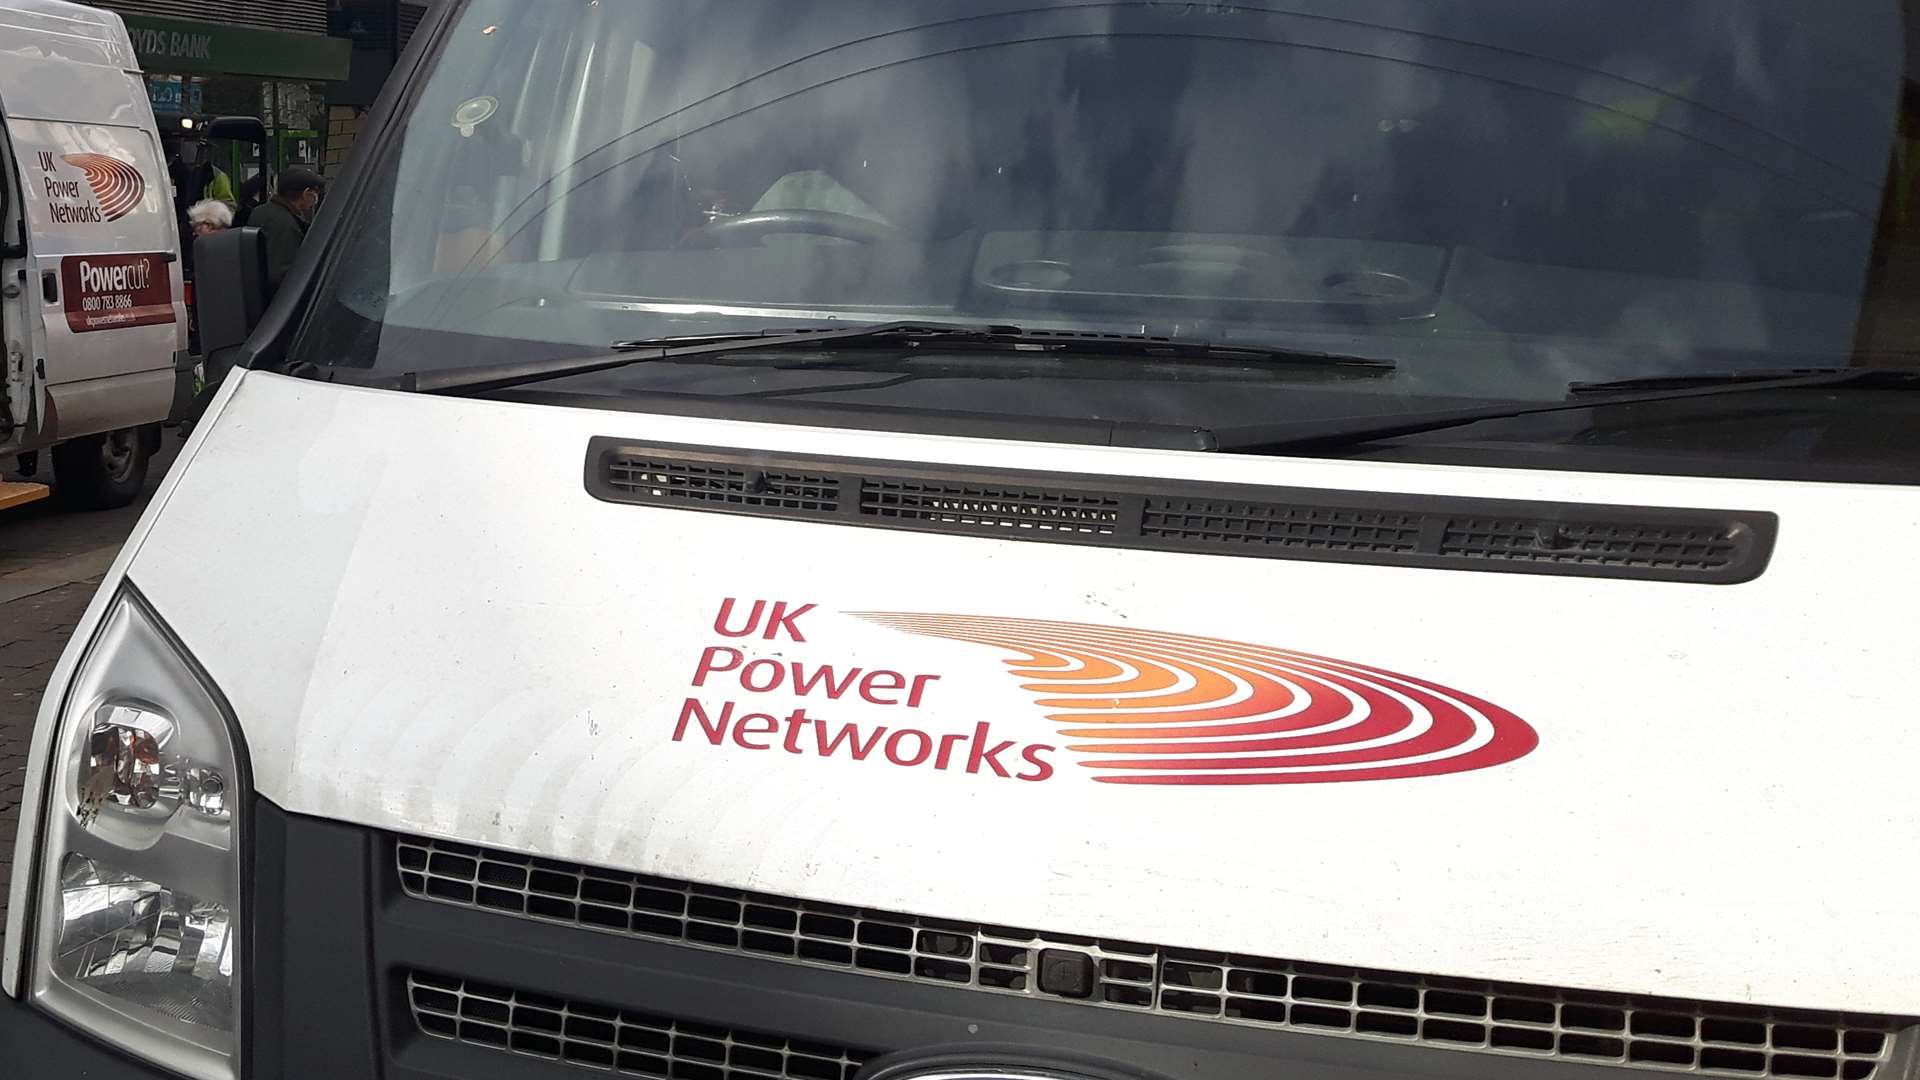 UK Power Networks were on the scene